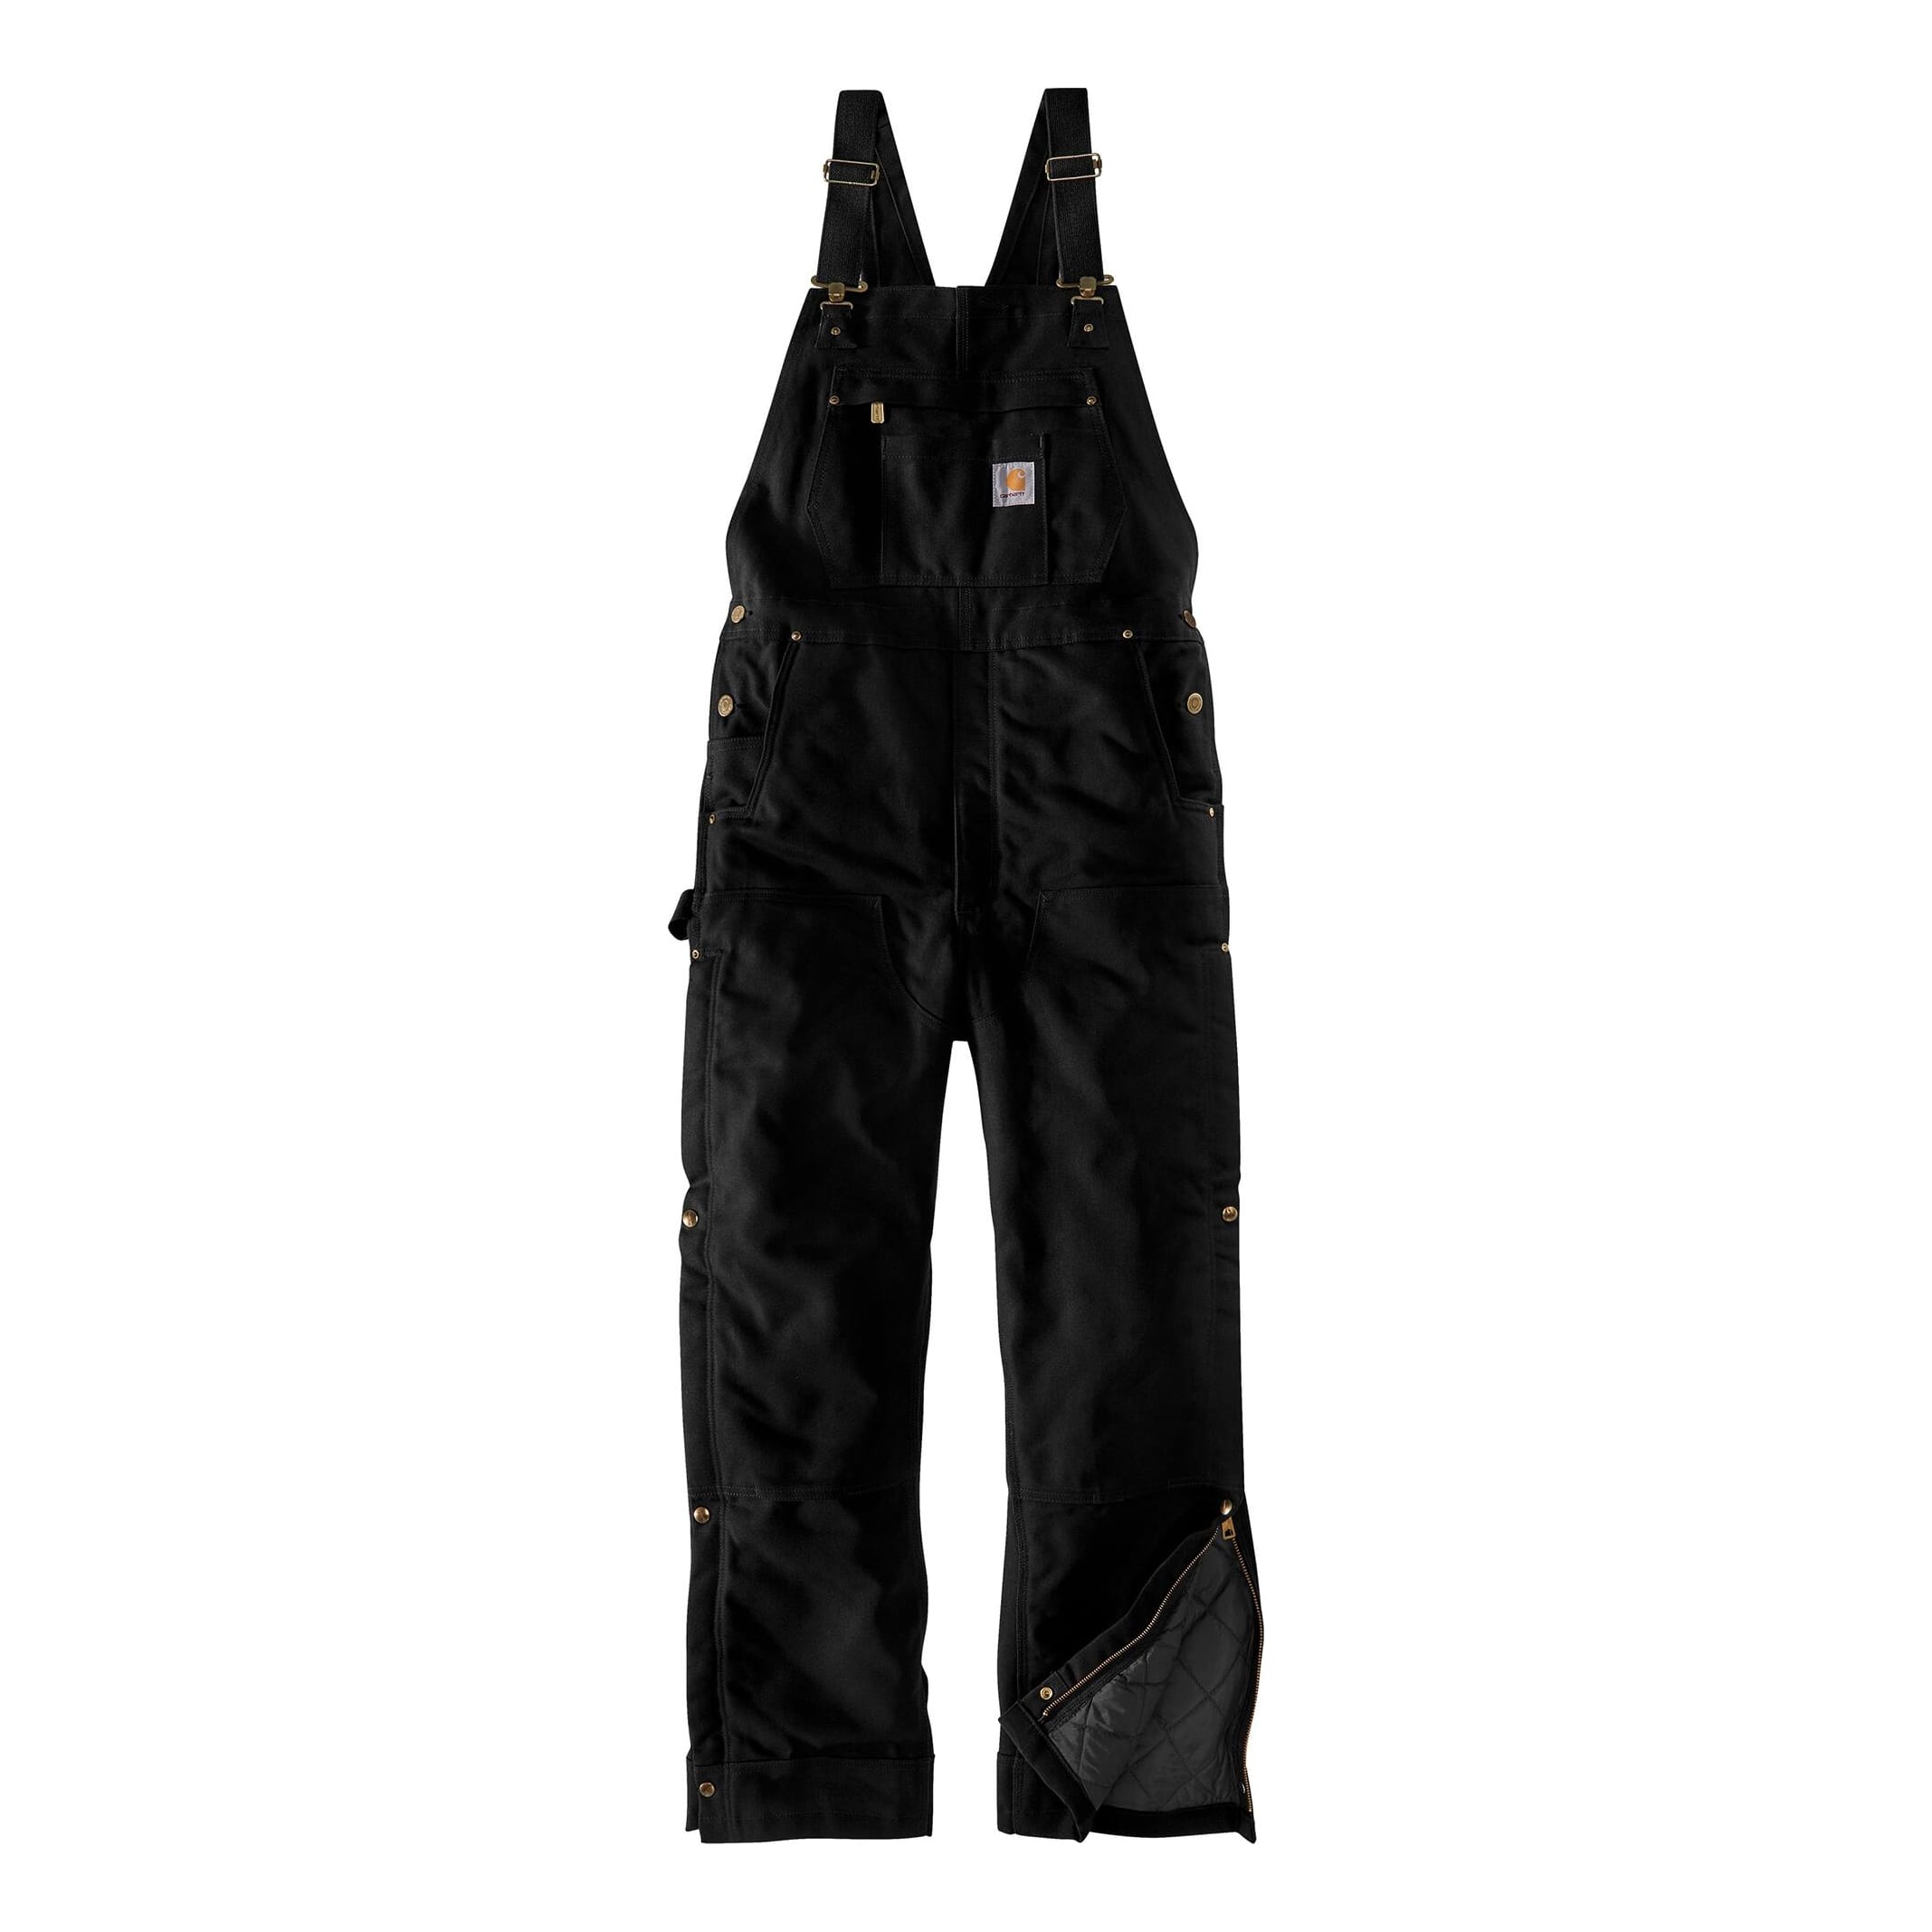 Carhartt® Men’s Loose Fit Firm Duck Insulated Bib Overall - Black